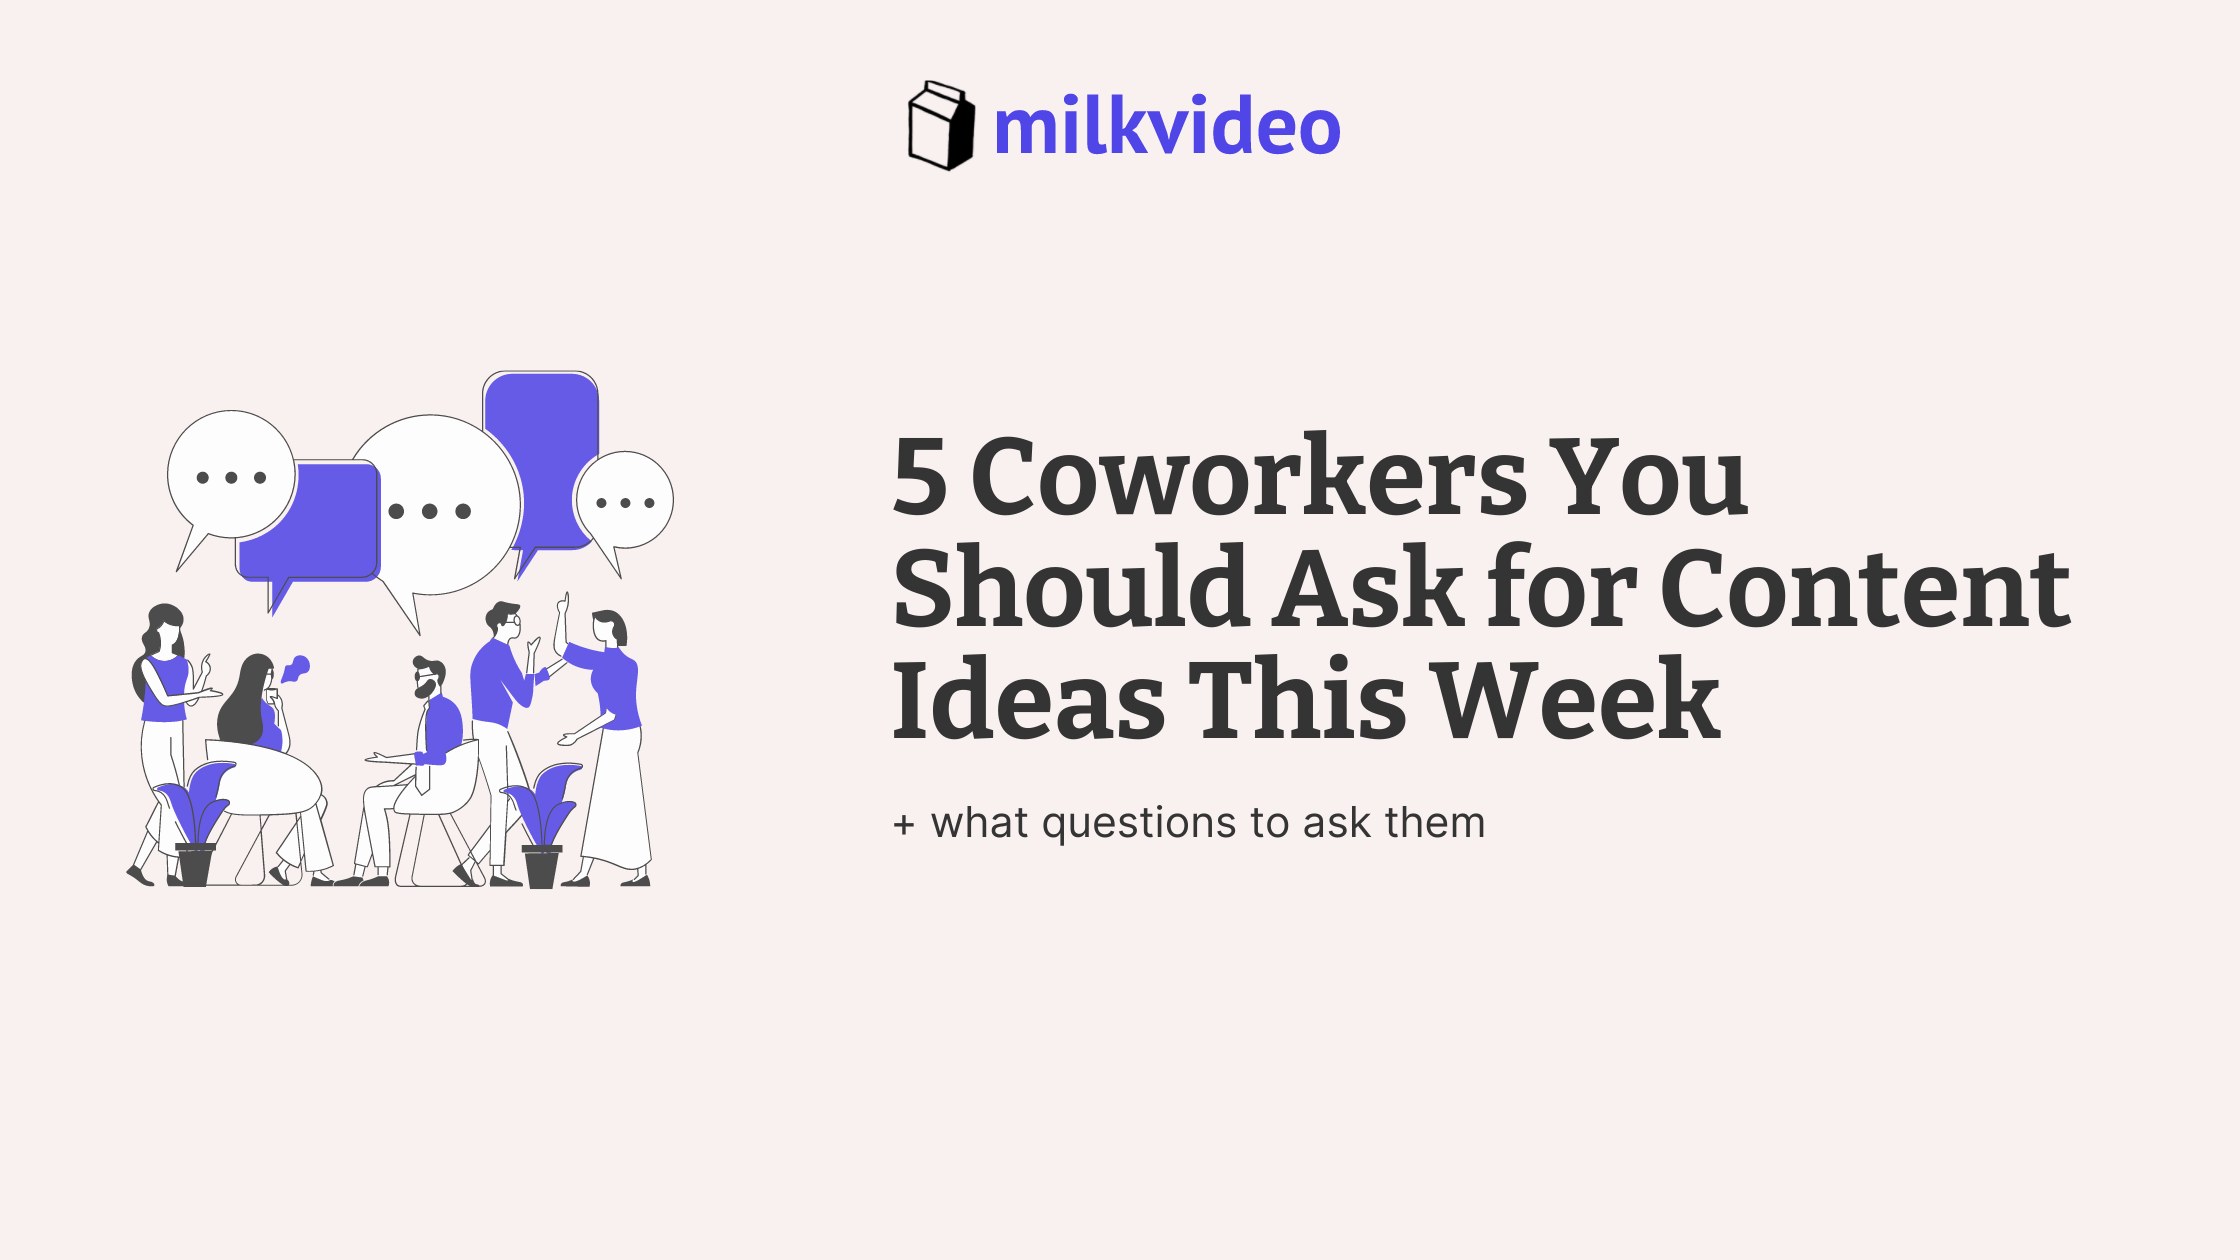 5 Coworkers You Should Ask for Content Ideas This Week